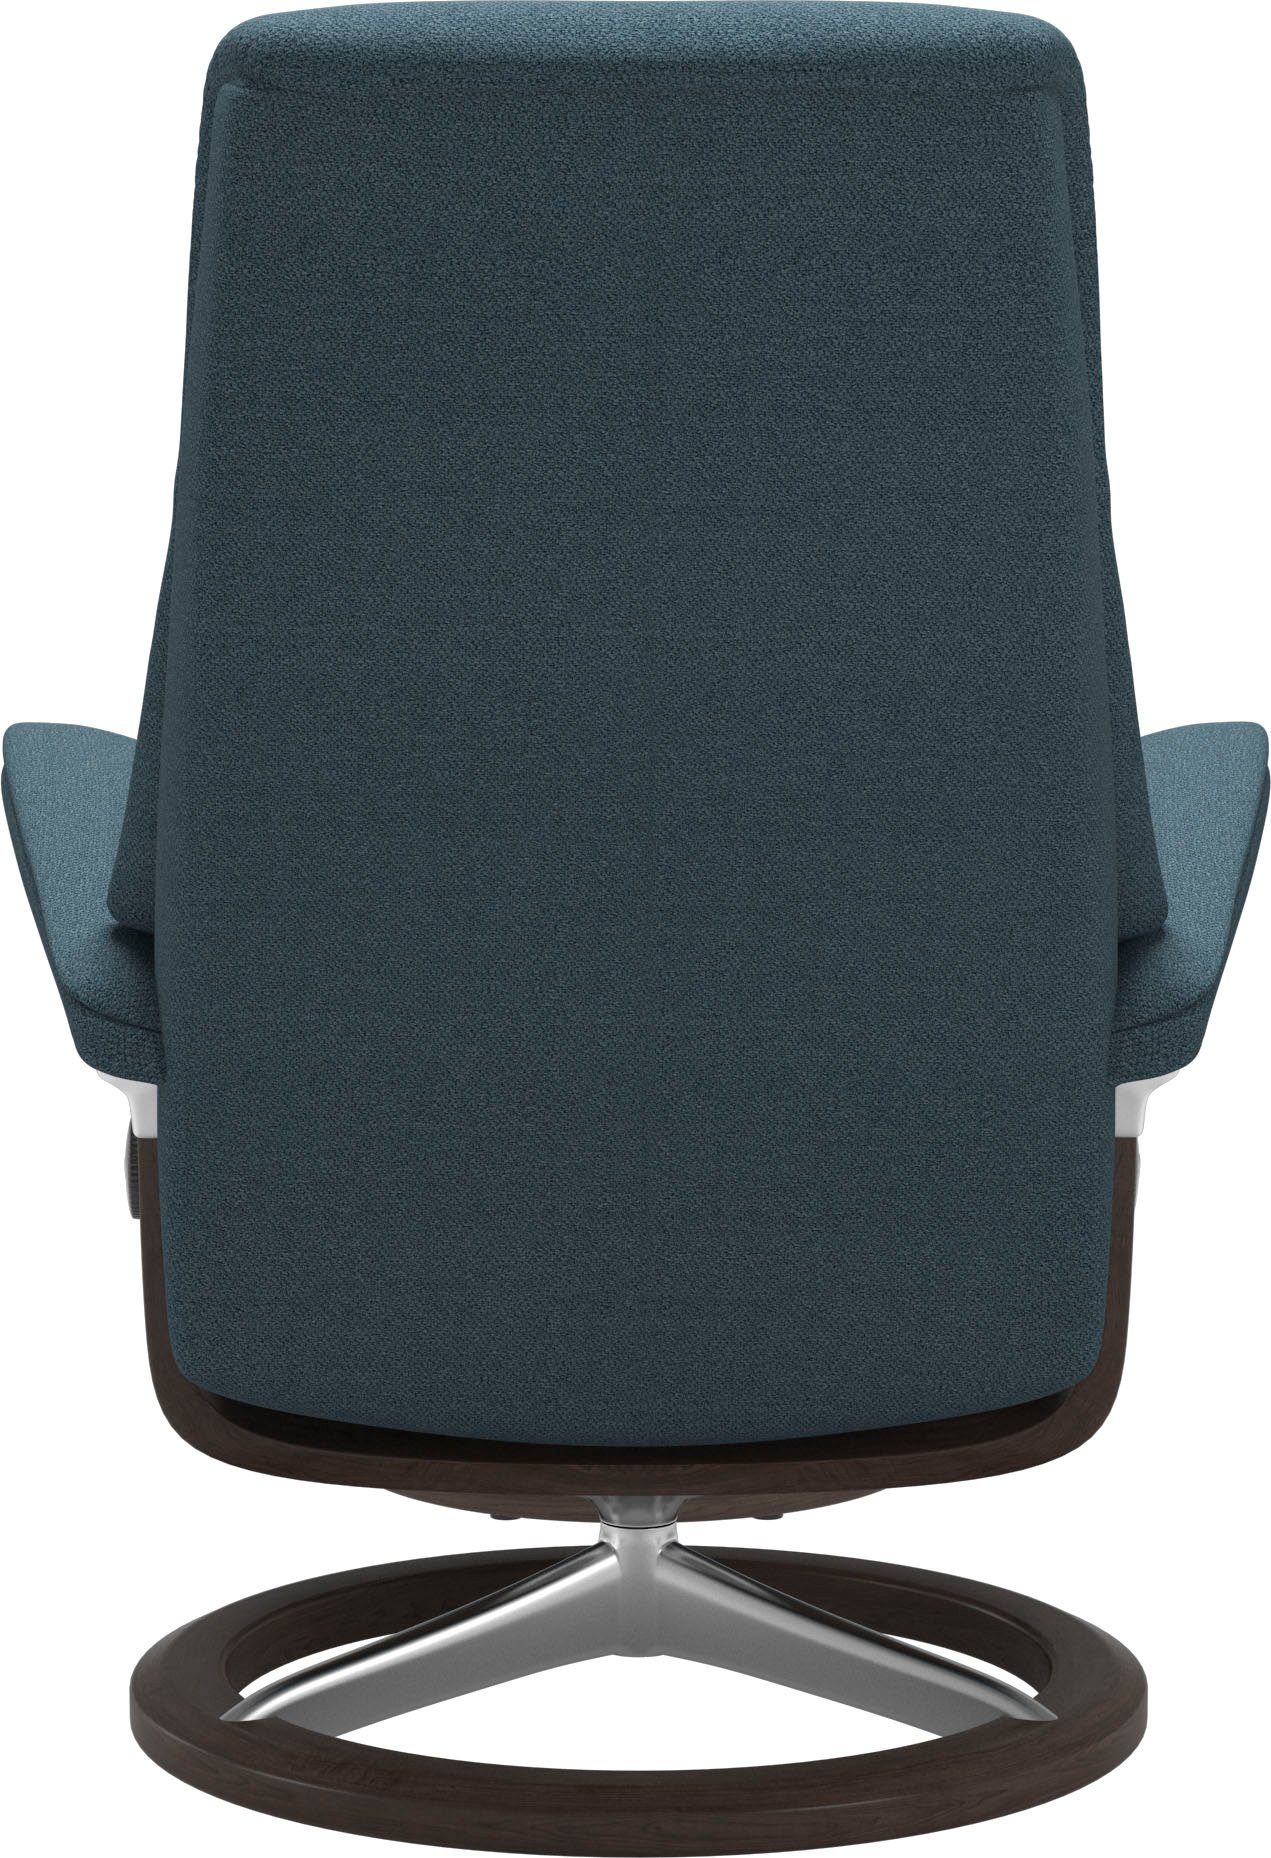 Wenge S,Gestell Base, View, Größe mit Signature Stressless® Relaxsessel